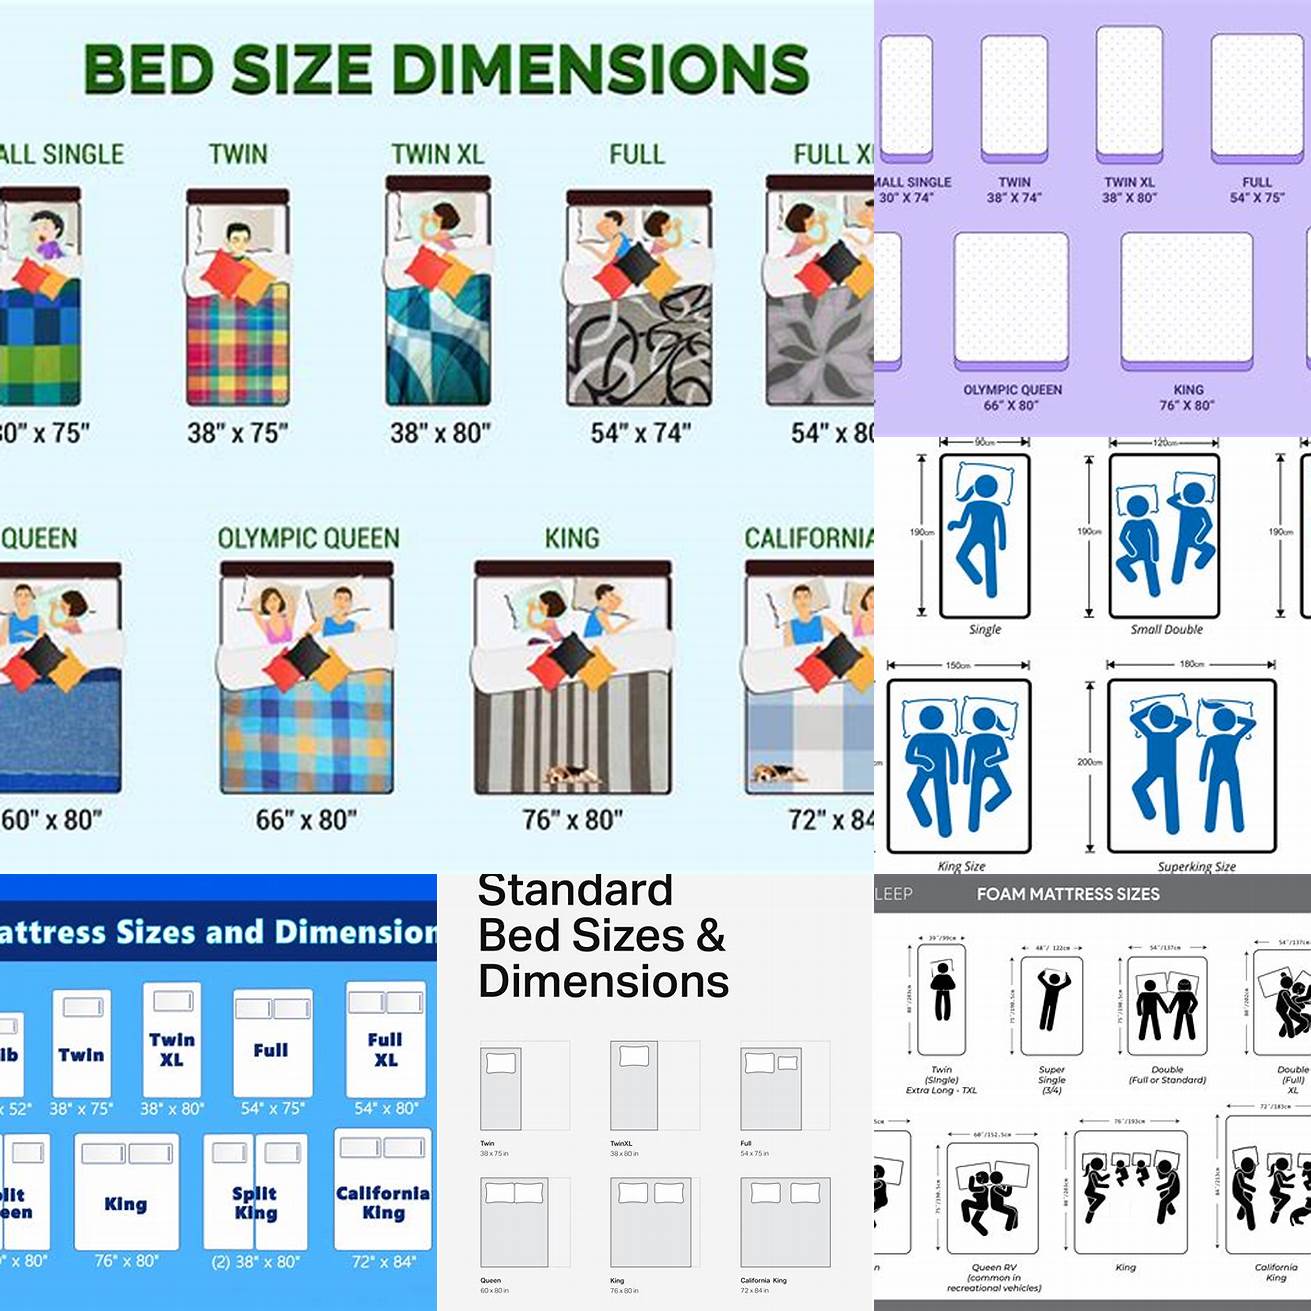 Image of different bed sizes side by side